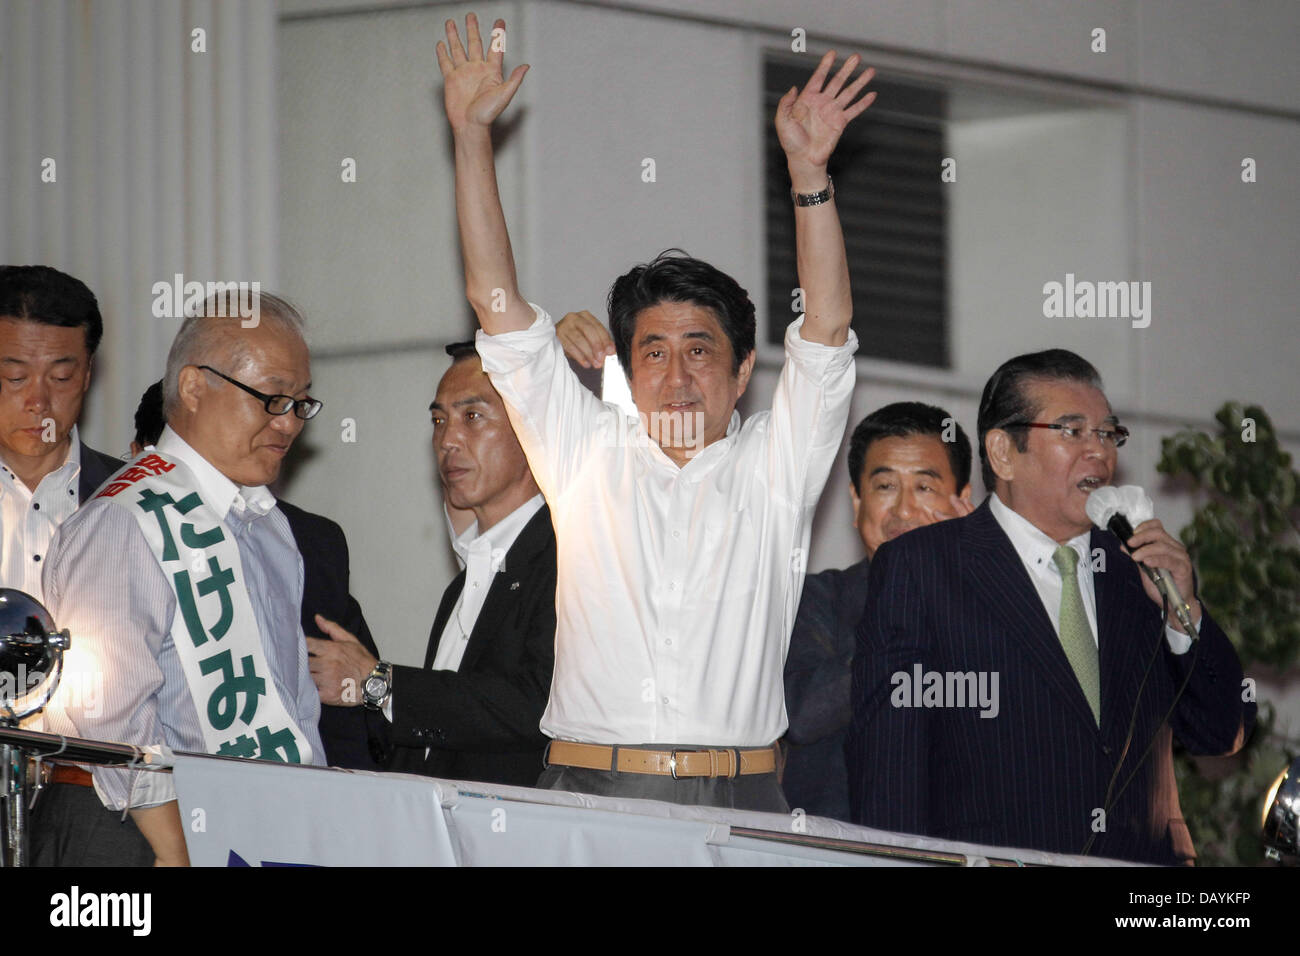 Tokyo, Japan. 20th July, 2013. Shinzo Abe, Japan's Prime Minister and president of the ruling Liberal Democratic Party, in his shirt sleeves solicits votes for the party's candidate on his final stumping tour at Tokyo's Asakusa district on Saturday, July 20, 2013, as he wraps up official campaigning for Sunday's upper house election. The ruling coalition led by Abe's LDP is likely to win a comfortable majority that will give him a total control of both chambers of Japan's parliament. Credit:  Aflo Co. Ltd./Alamy Live News Stock Photo